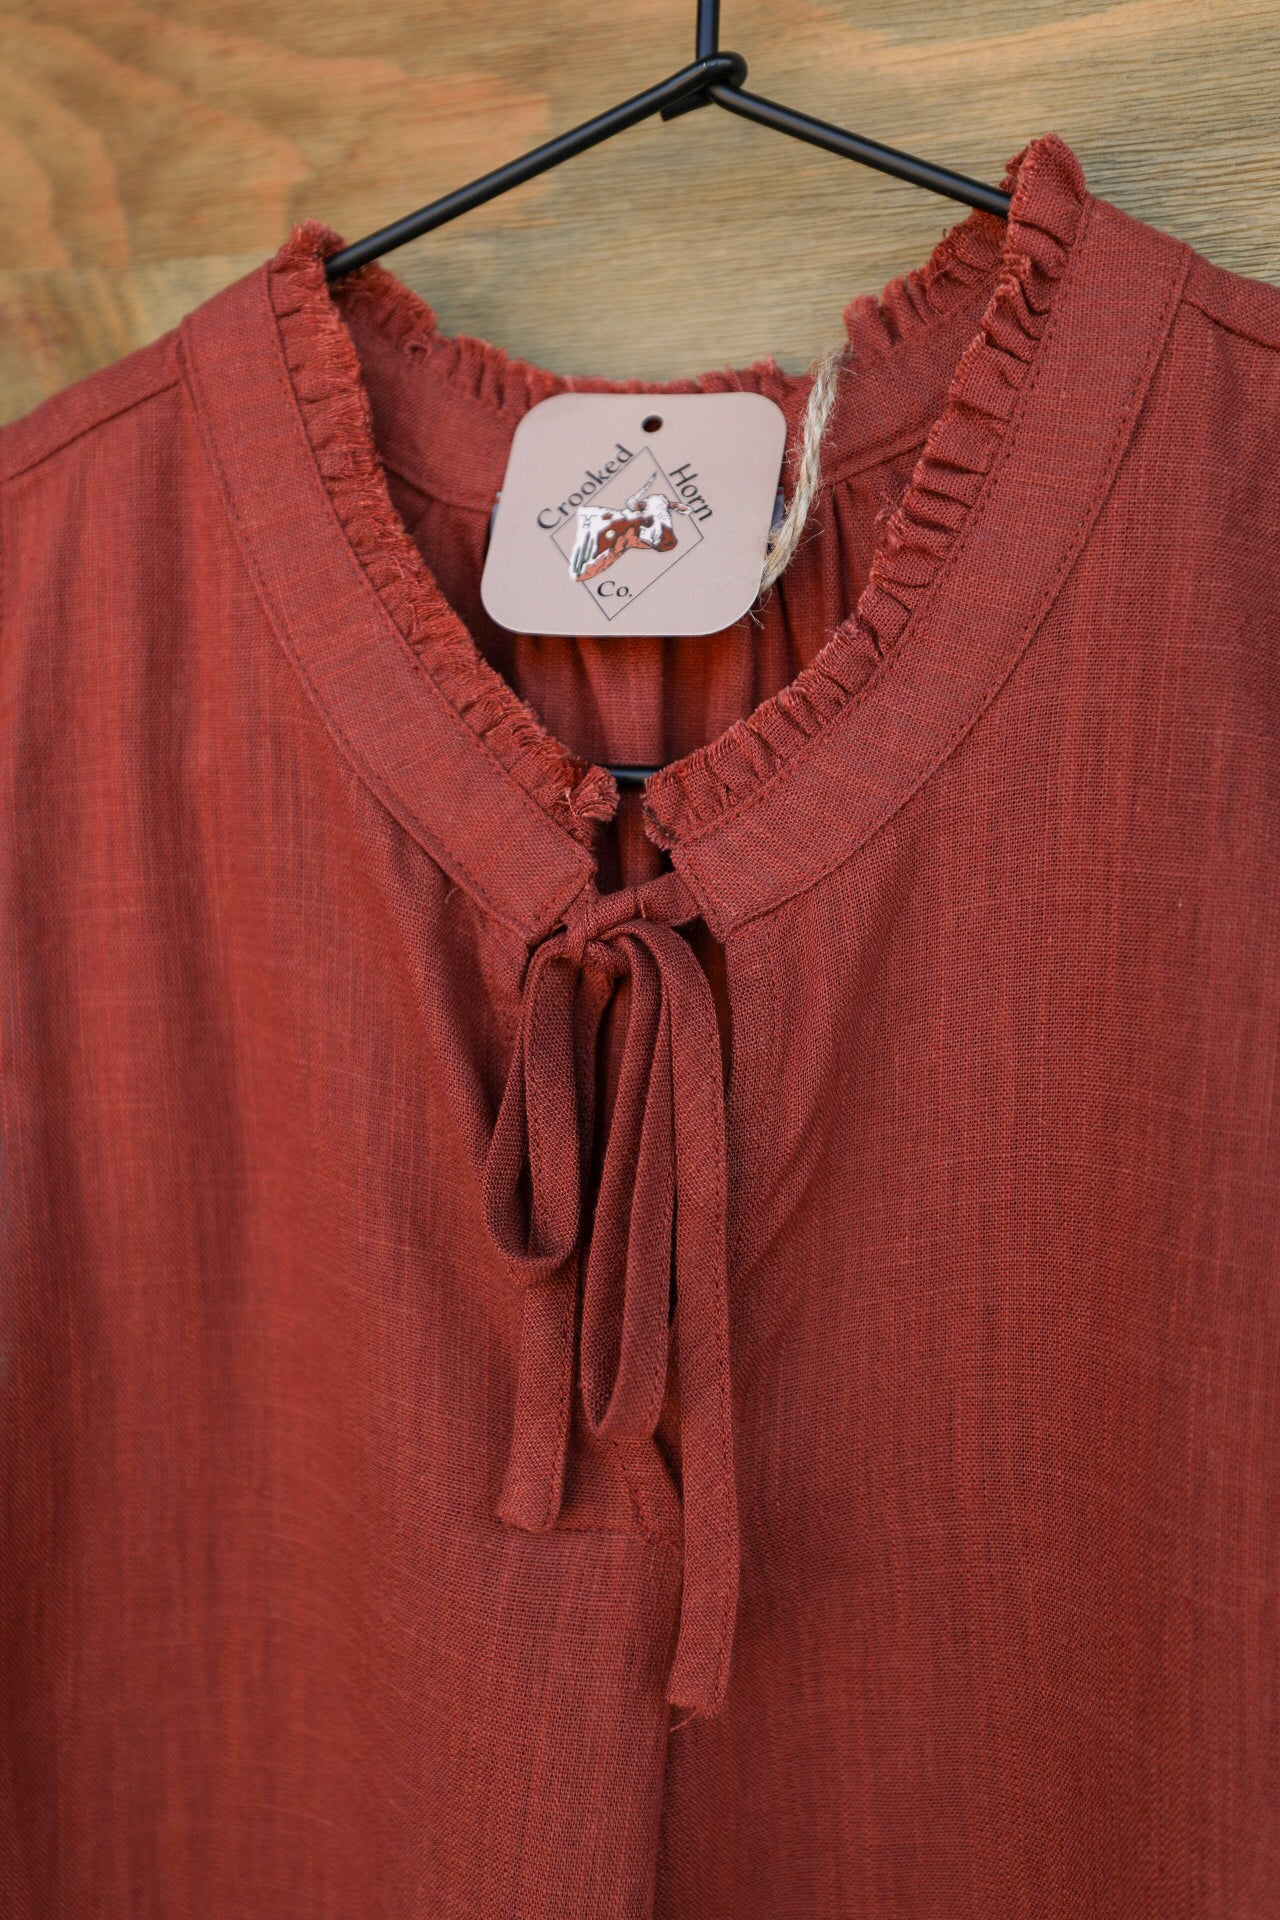 Superior Top-Shirts-Crooked Horn Company, Online Women's Fashion Boutique in San Tan Valley, Arizona 85140